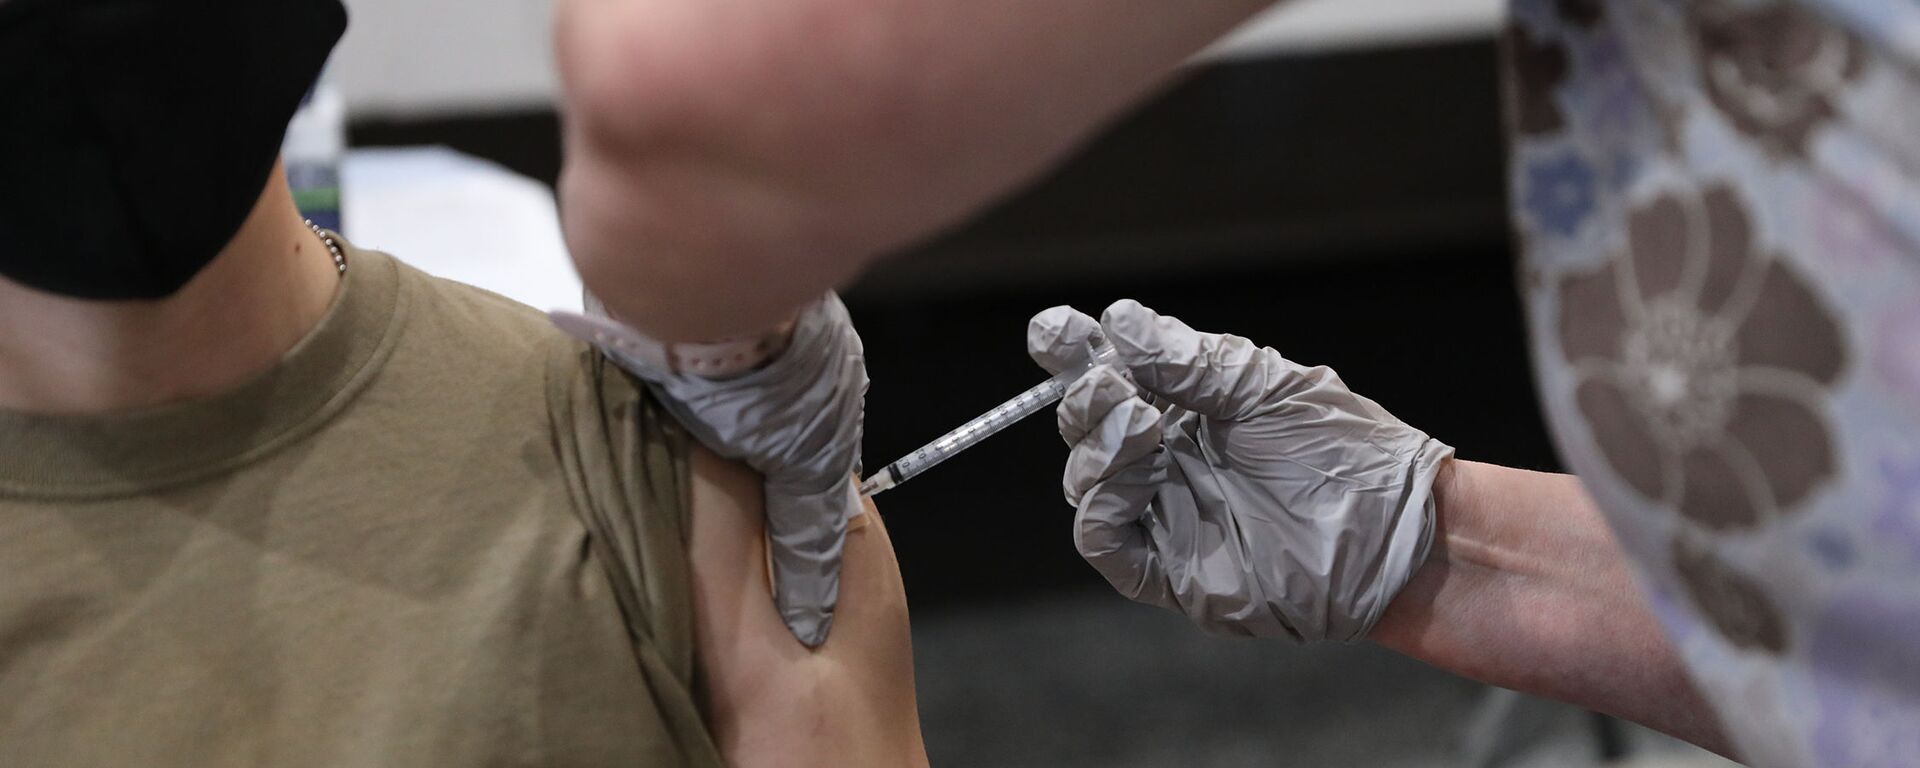 U.S. Army Sgt. Brandy Herrmann, assigned to the 24th Theater Public Affairs Support Element, receives the COVID-19 vaccination at Stayton Theater, at Fort Bliss, Texas, Feb. 5, 2021. Herrmann was instructed to wait 15 minutes before driving or participate in vigorous physical activity after receiving the shot. (U.S. Army photo by Pfc. Maxwell Bass, 24th Theater Public Affairs Support Element) - Sputnik International, 1920, 09.05.2023